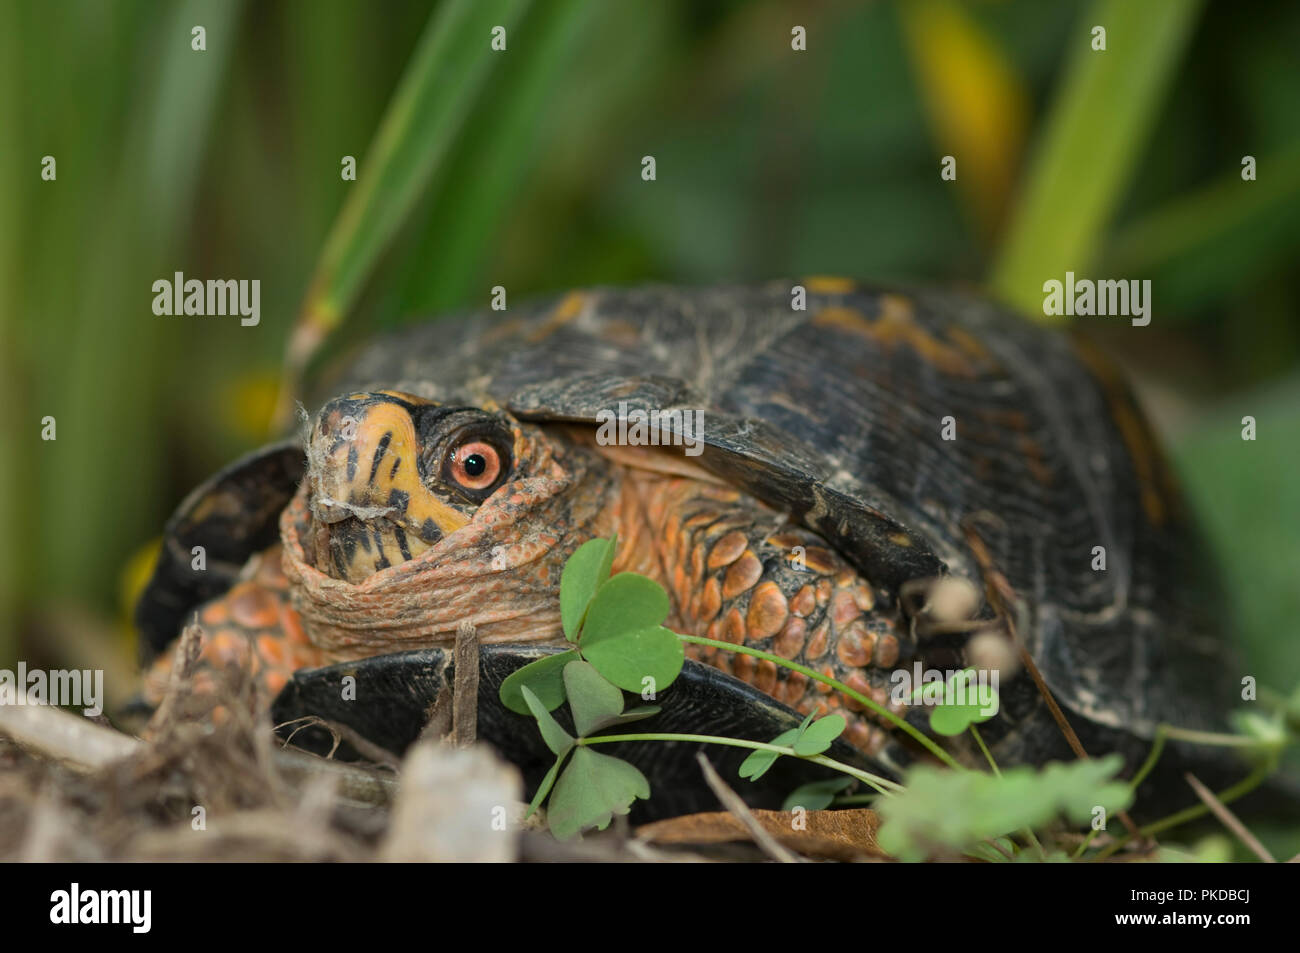 Eastern box turtle :: Terrapene carolina carolina .  Box turtles are listed as a threatened species, on CITES Appendix II. Collection for the pet trad Stock Photo